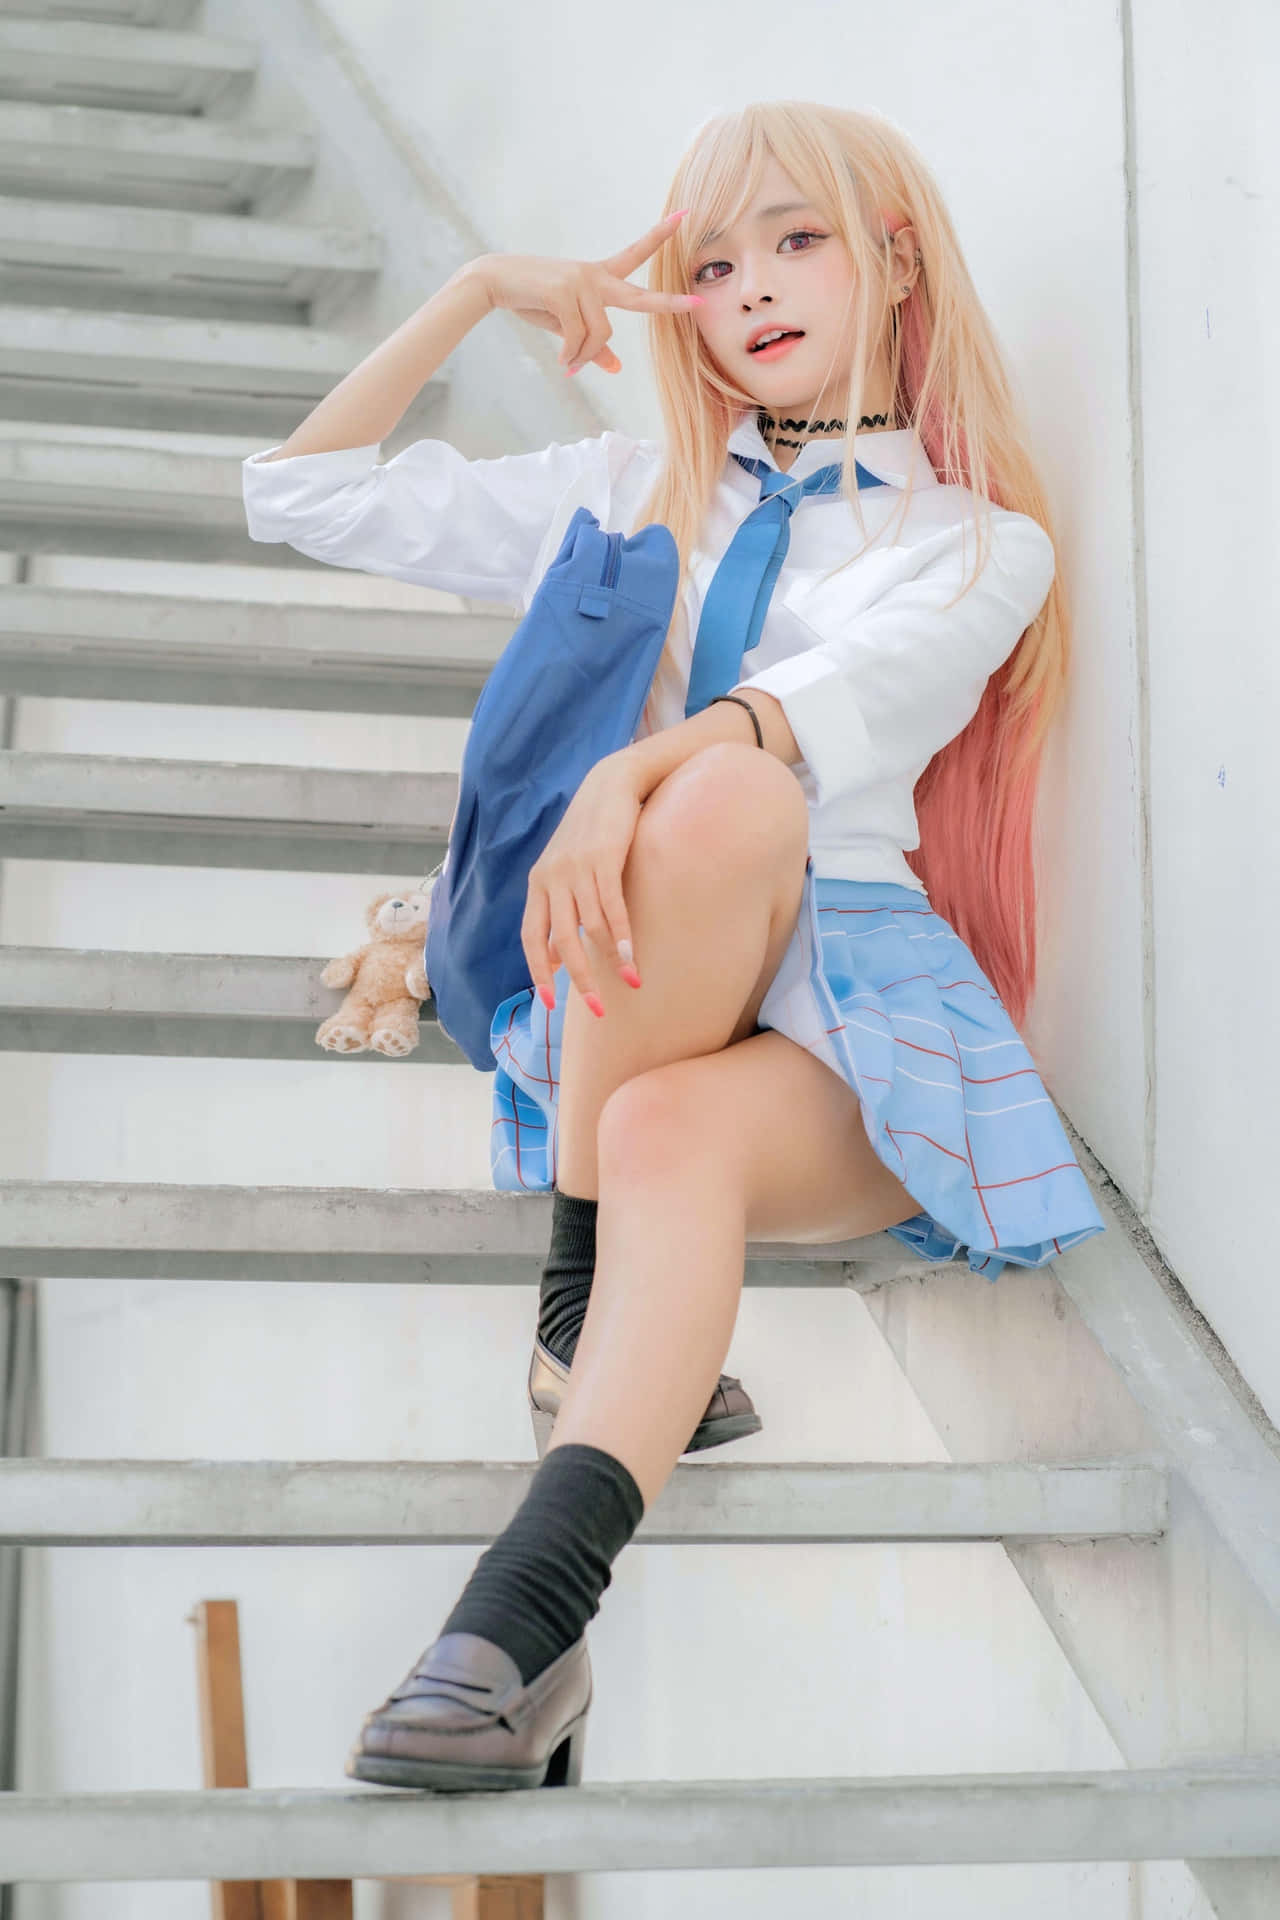 Pretty Derby Anime Cosplay Costume Sweet Cute Girls Hallowmas Outfit Role  Play | eBay